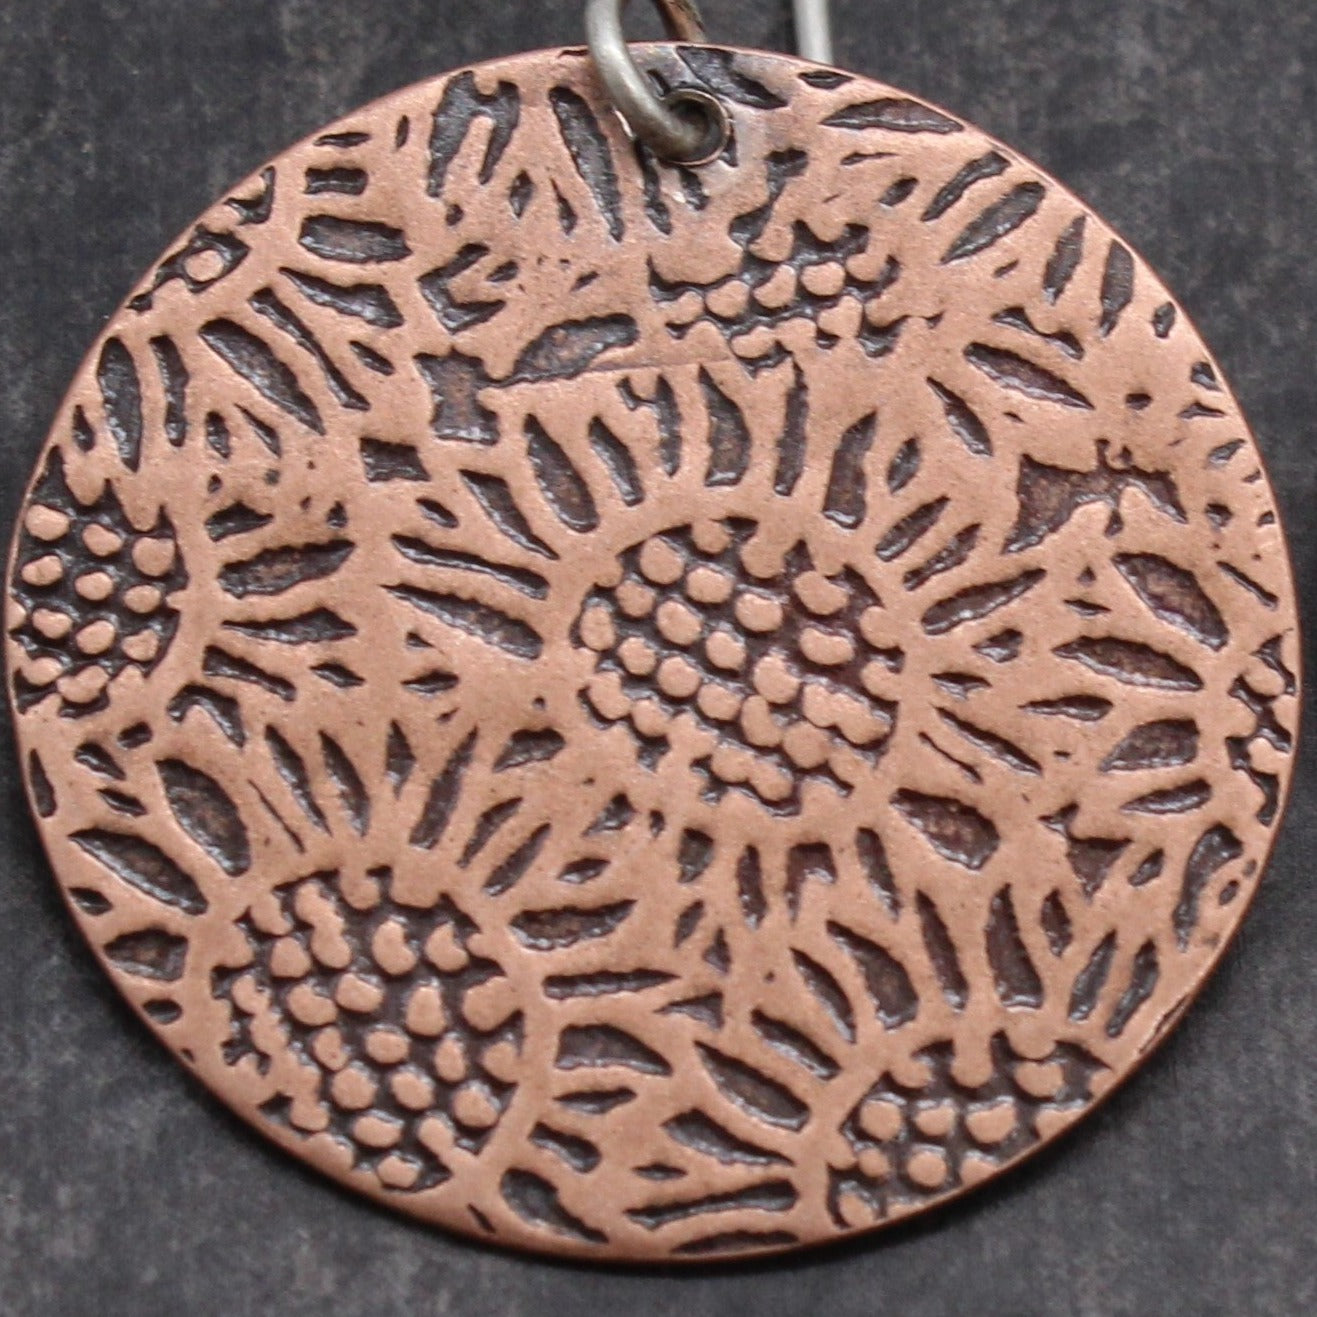 Sunflower or Mountain Necklace in Copper or Silver